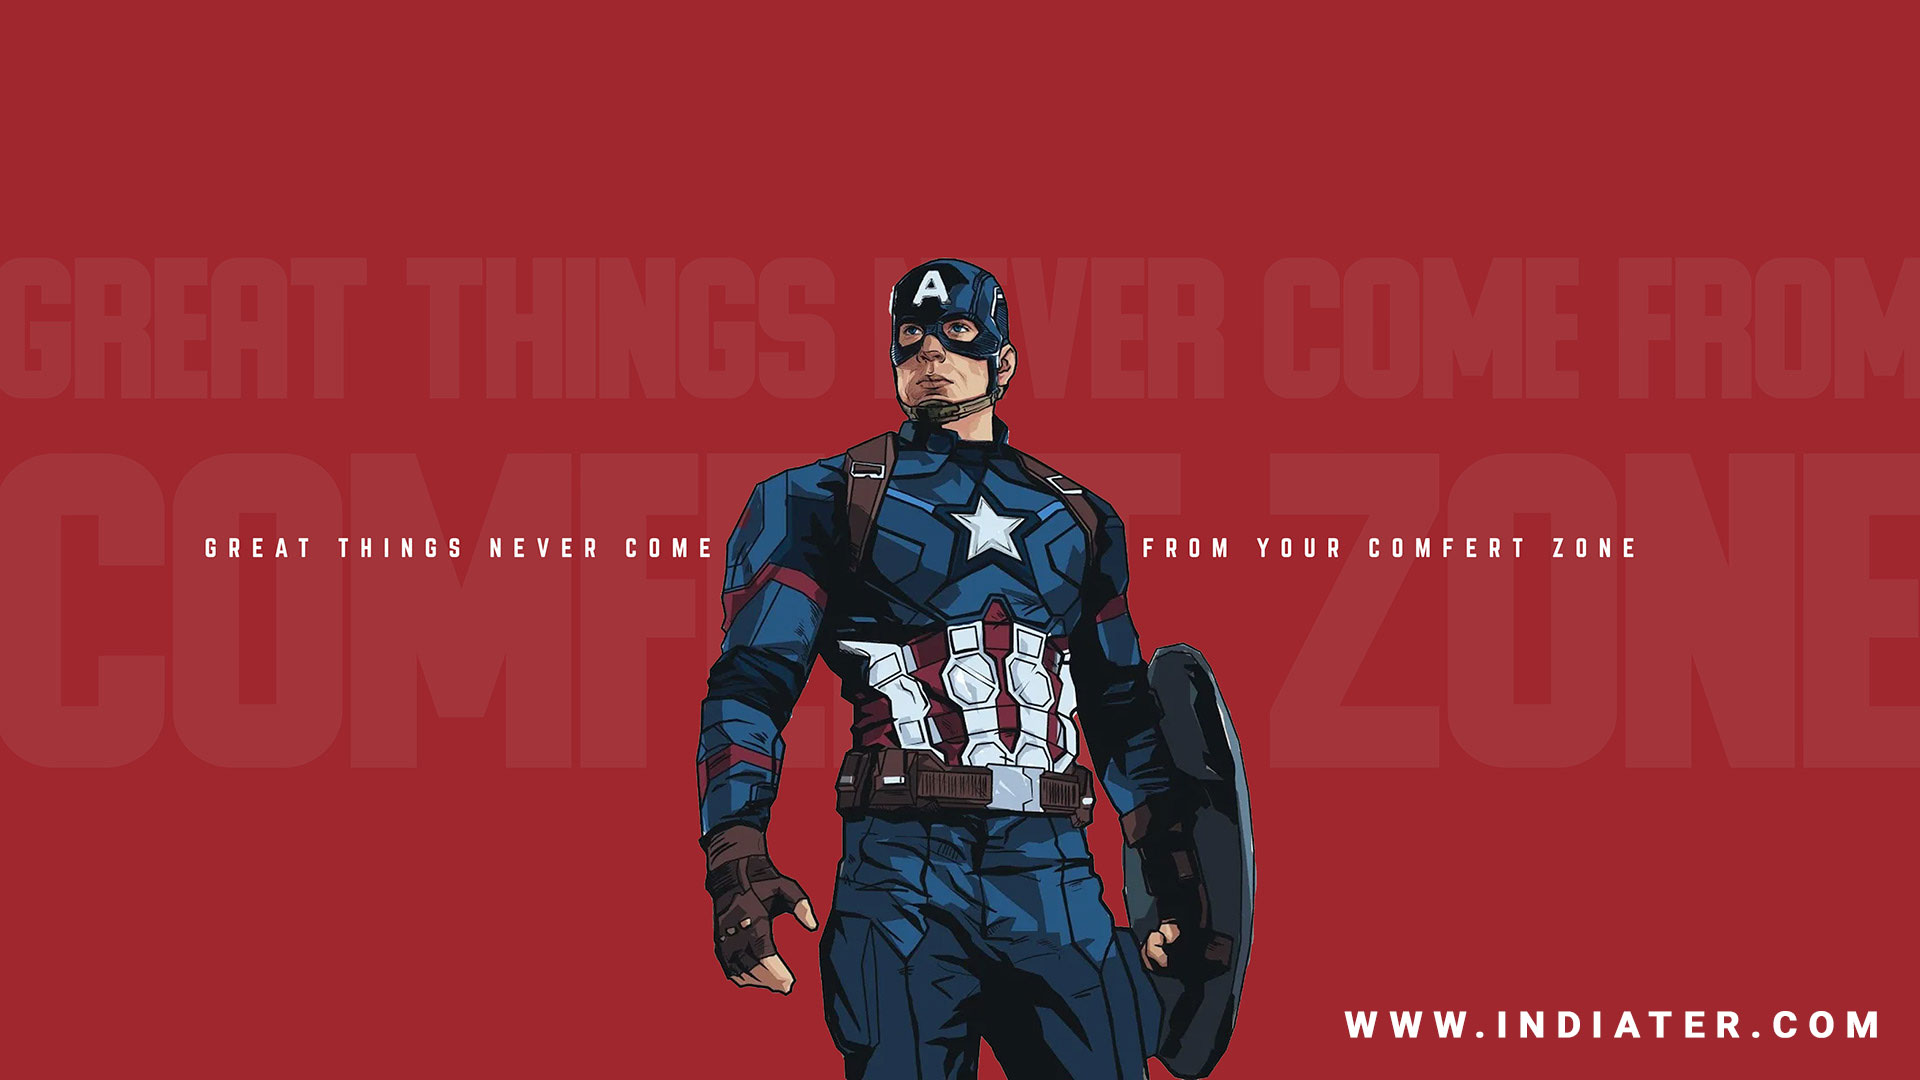 4 Different Color Captain America Wallpaper PSD Backgrounds for Photoshop  Free Download - Indiater